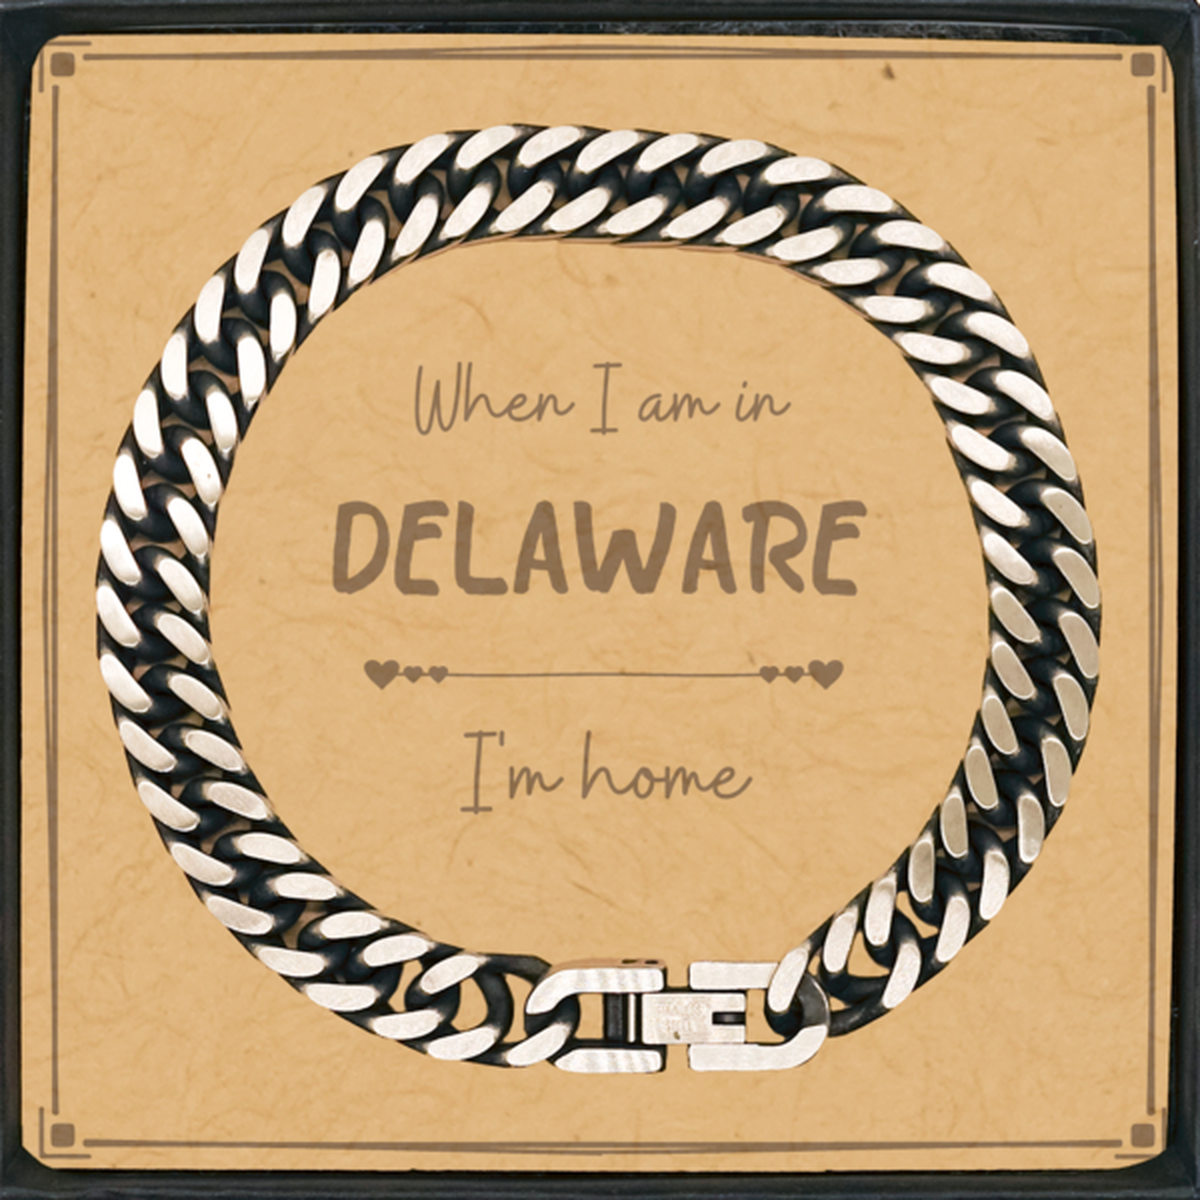 When I am in Delaware I'm home Cuban Link Chain Bracelet, Message Card Gifts For Delaware, State Delaware Birthday Gifts for Friends Coworker